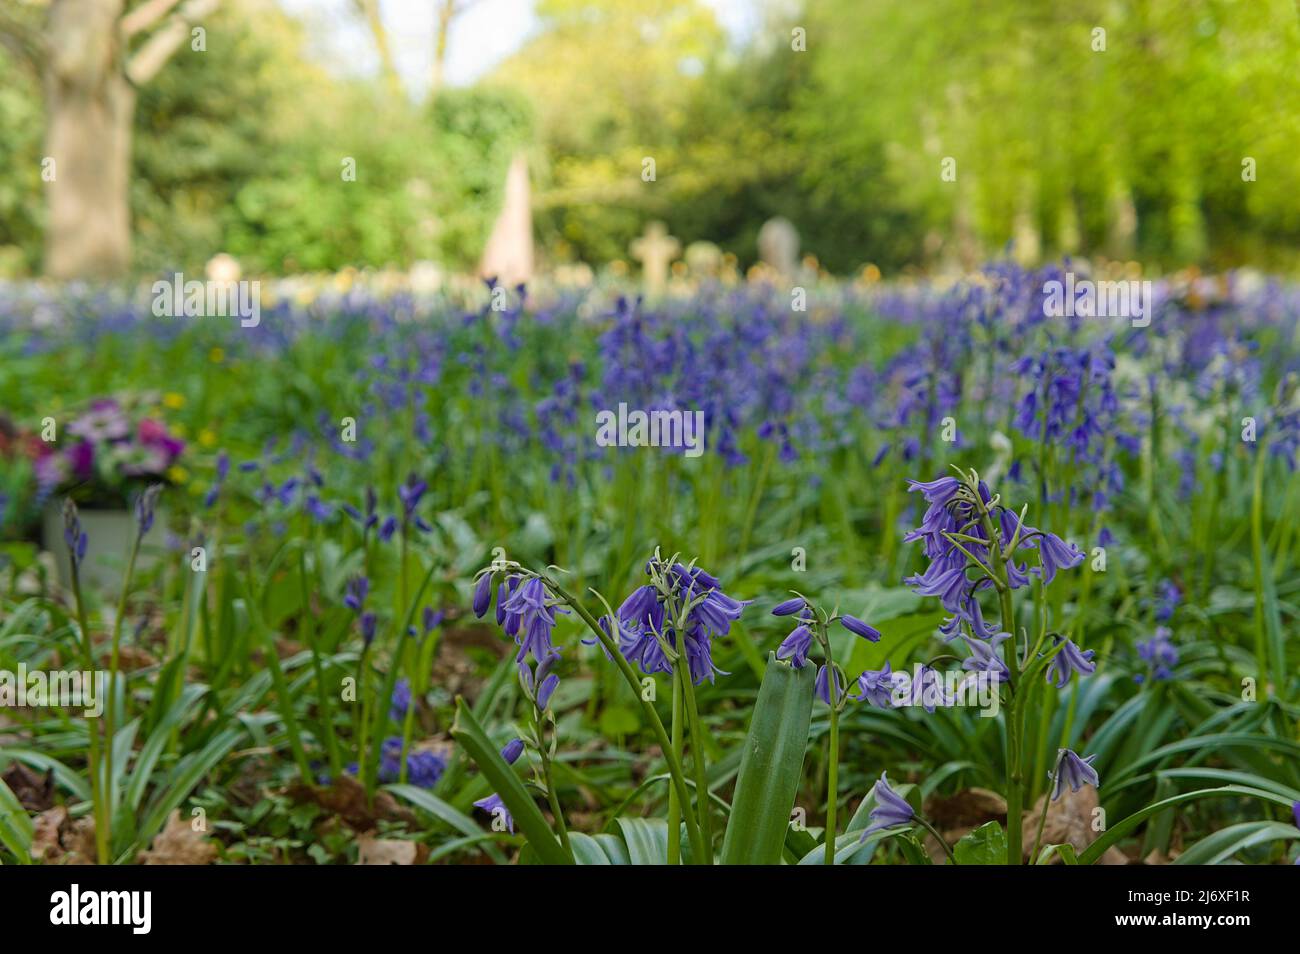 Spanish bluebell flowers (Hyacinthoides non-scripta) in a woodland cemetery with soft focus background Stock Photo